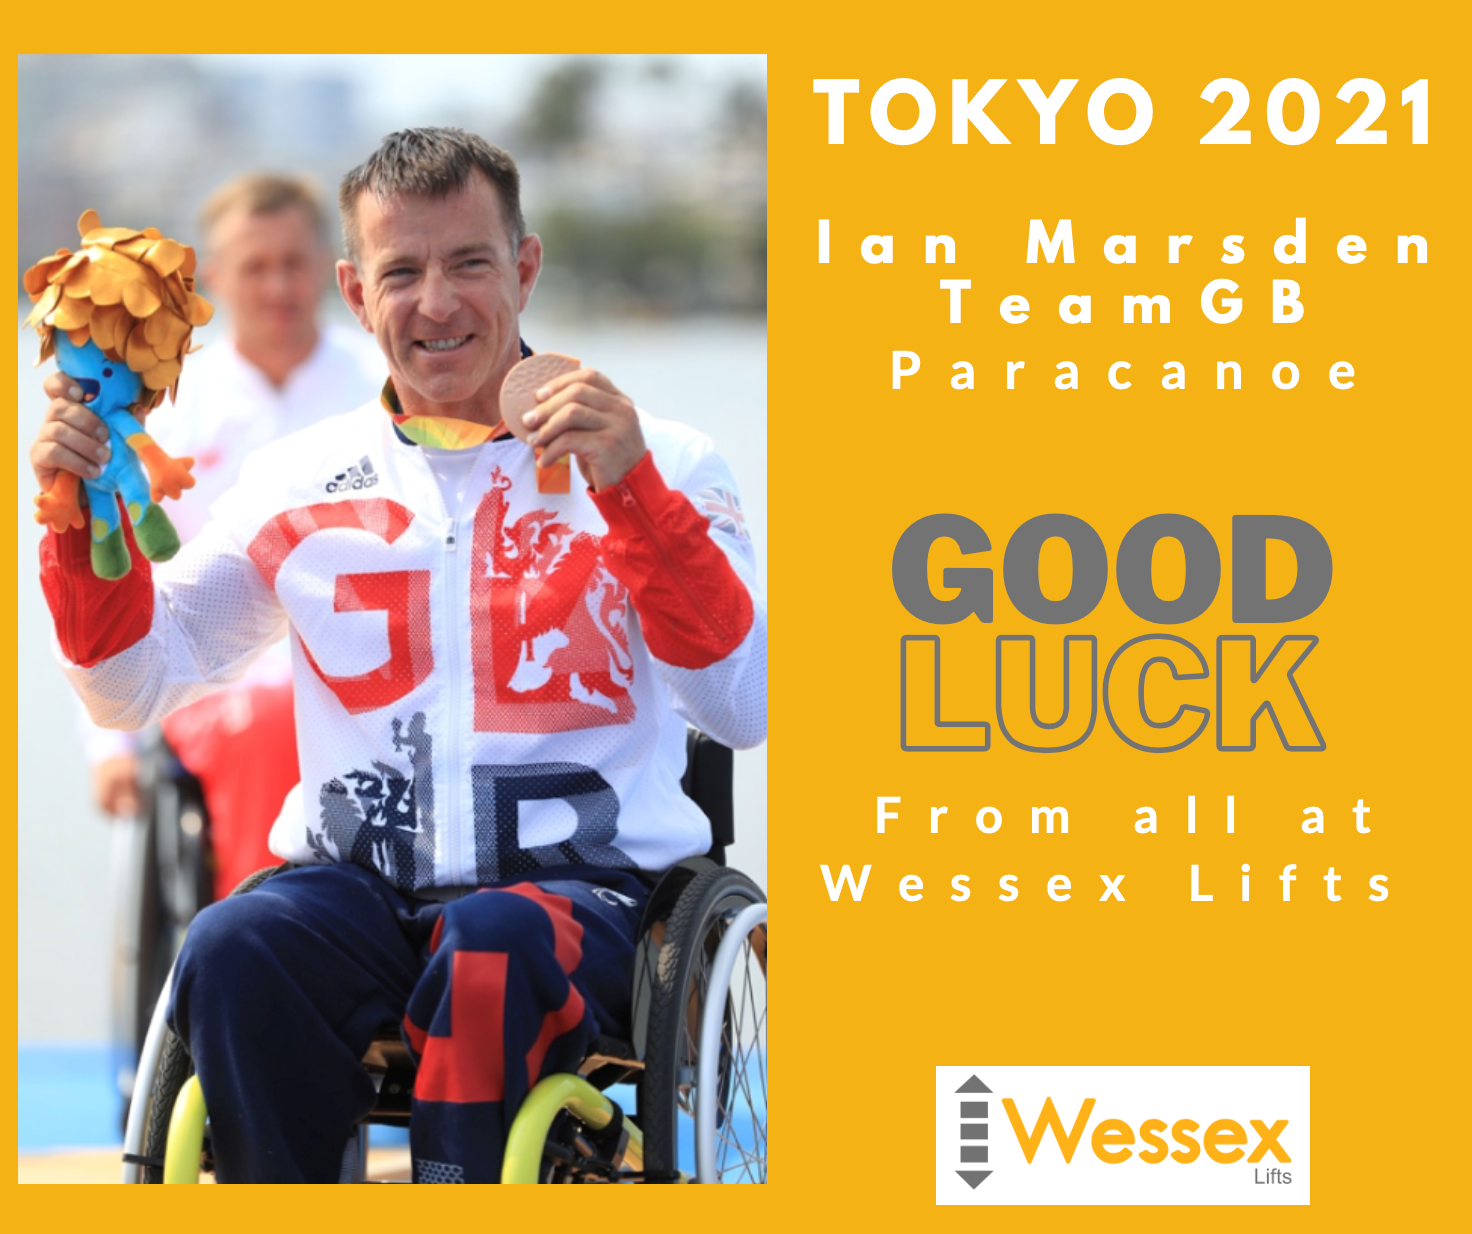 Ian with his previous Paralympic medal. Text reads: 'Tokyo 2021, Ian Marsden Team GB Paracanoe. Good Luck, from all at Wessex Lifts'